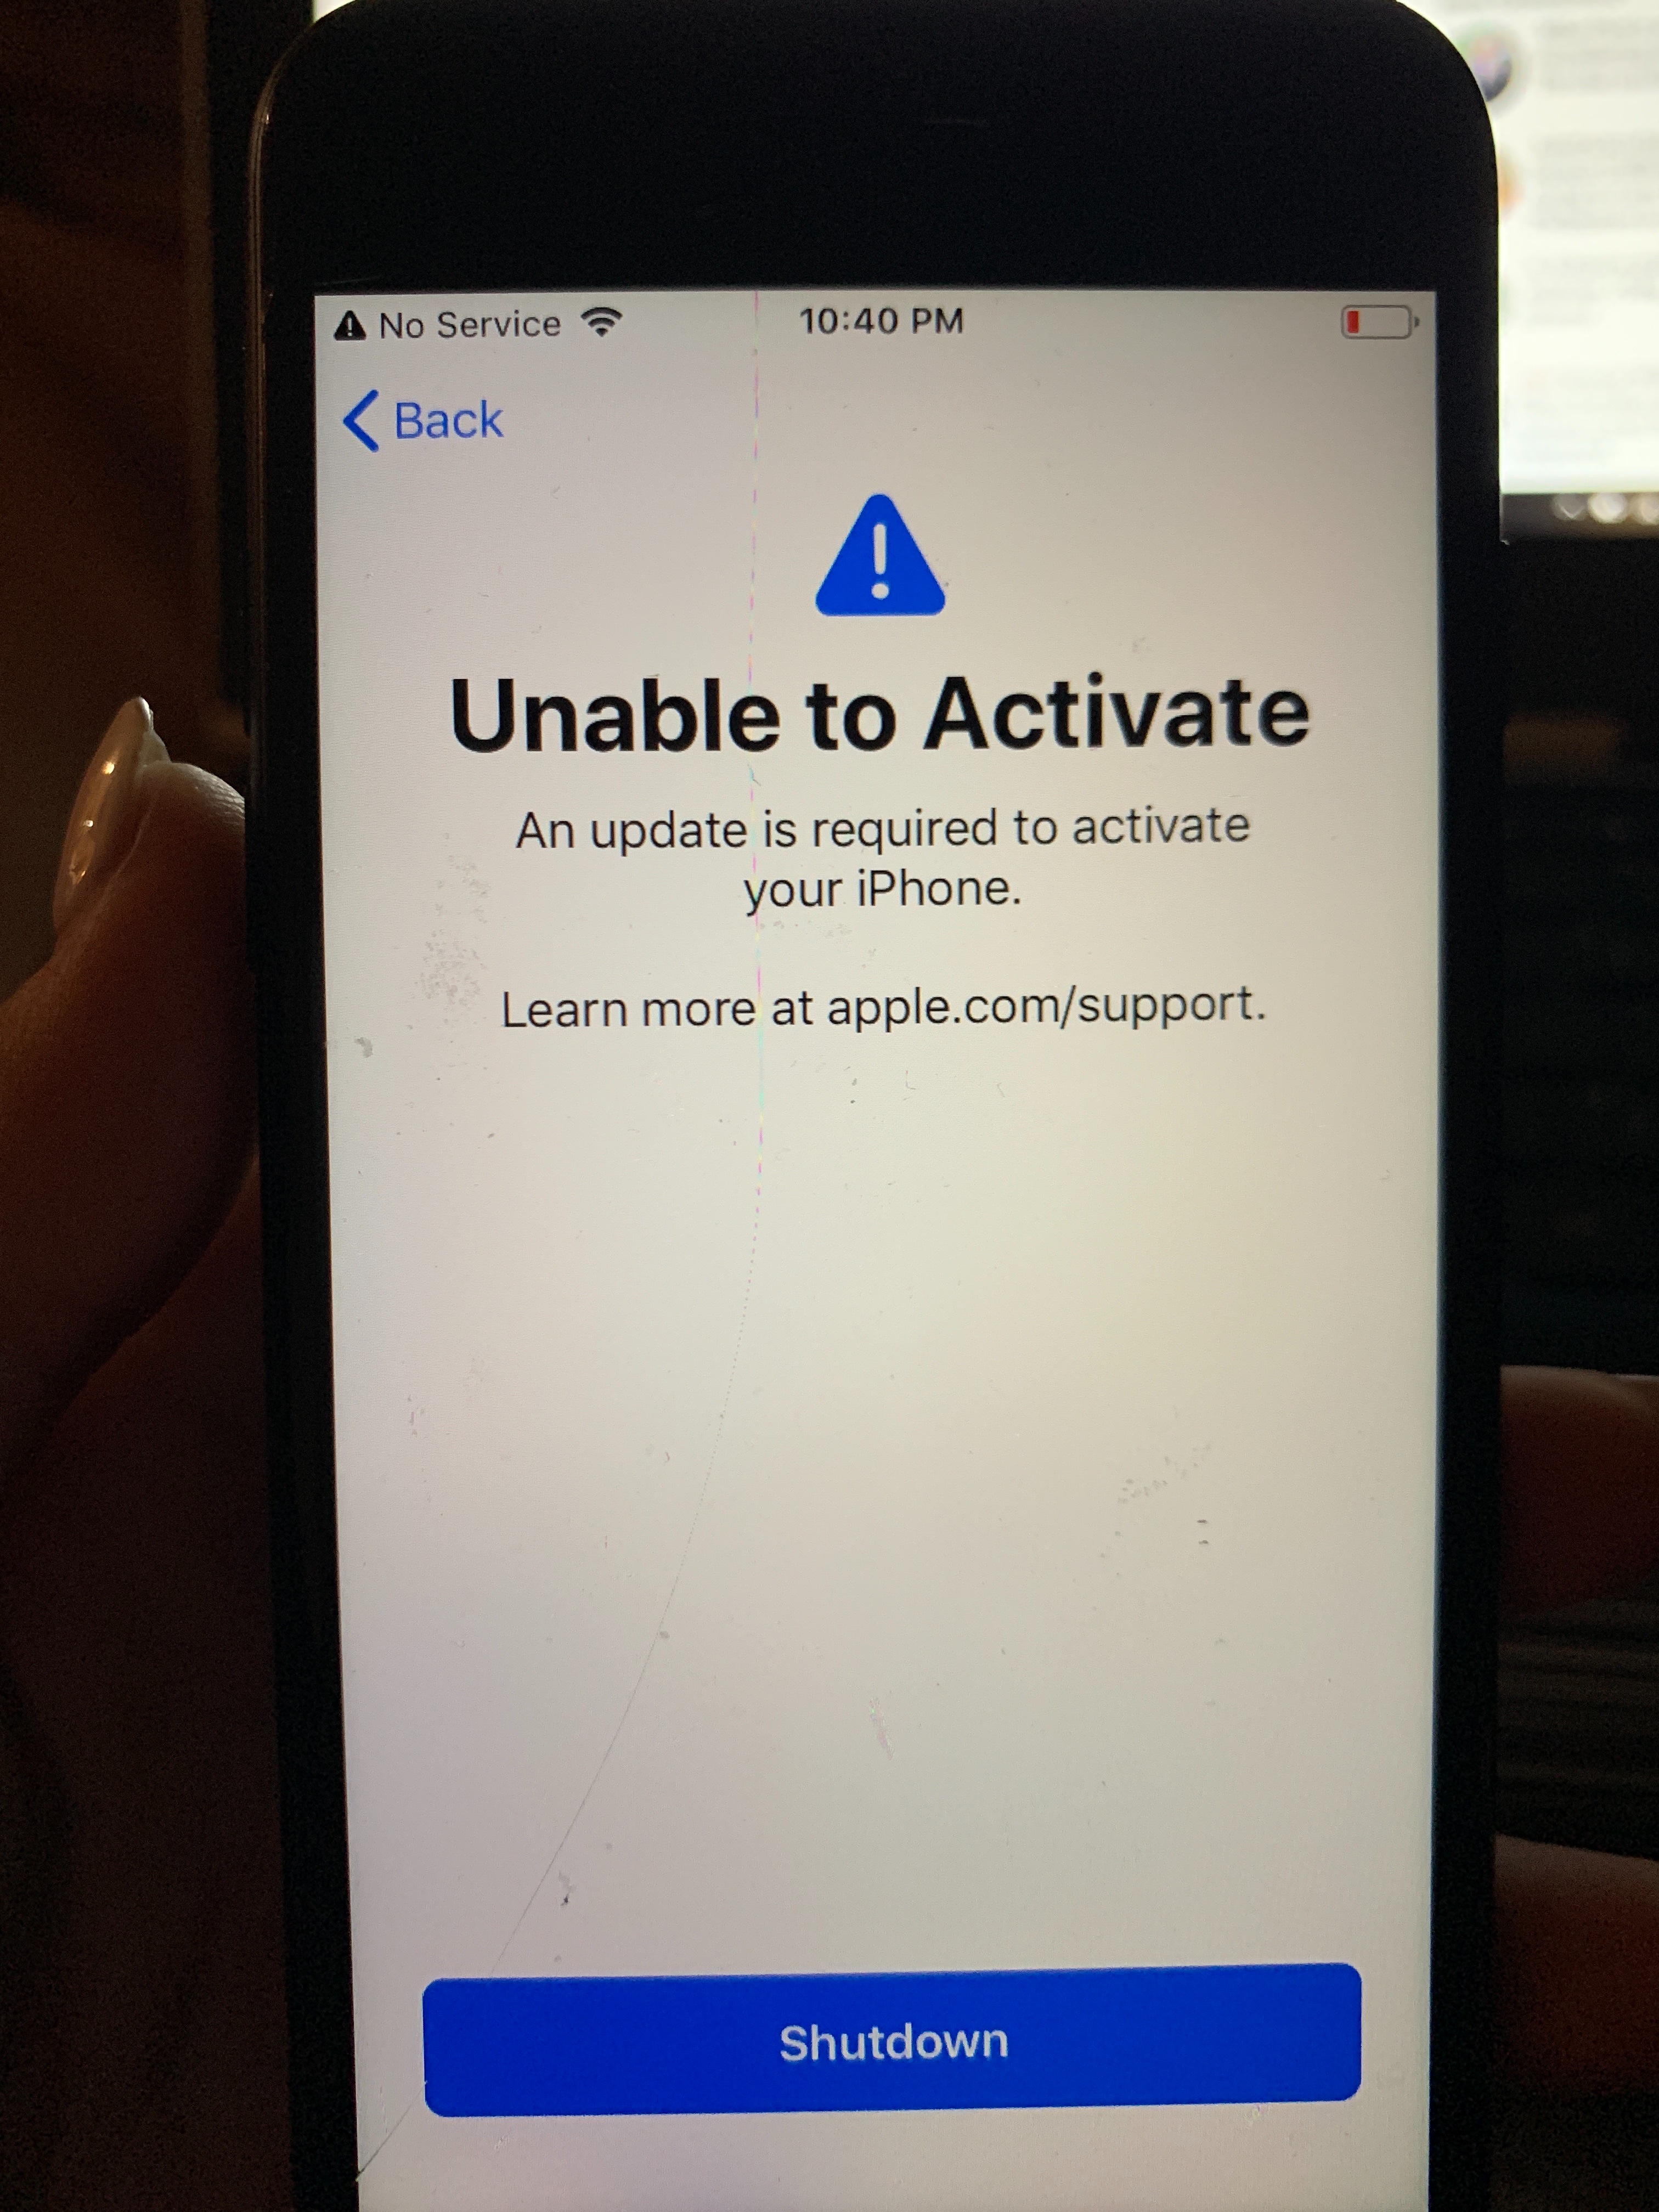 Iphone Wont Let Me Sign Out Of Icloud unable to activate - Apple Community